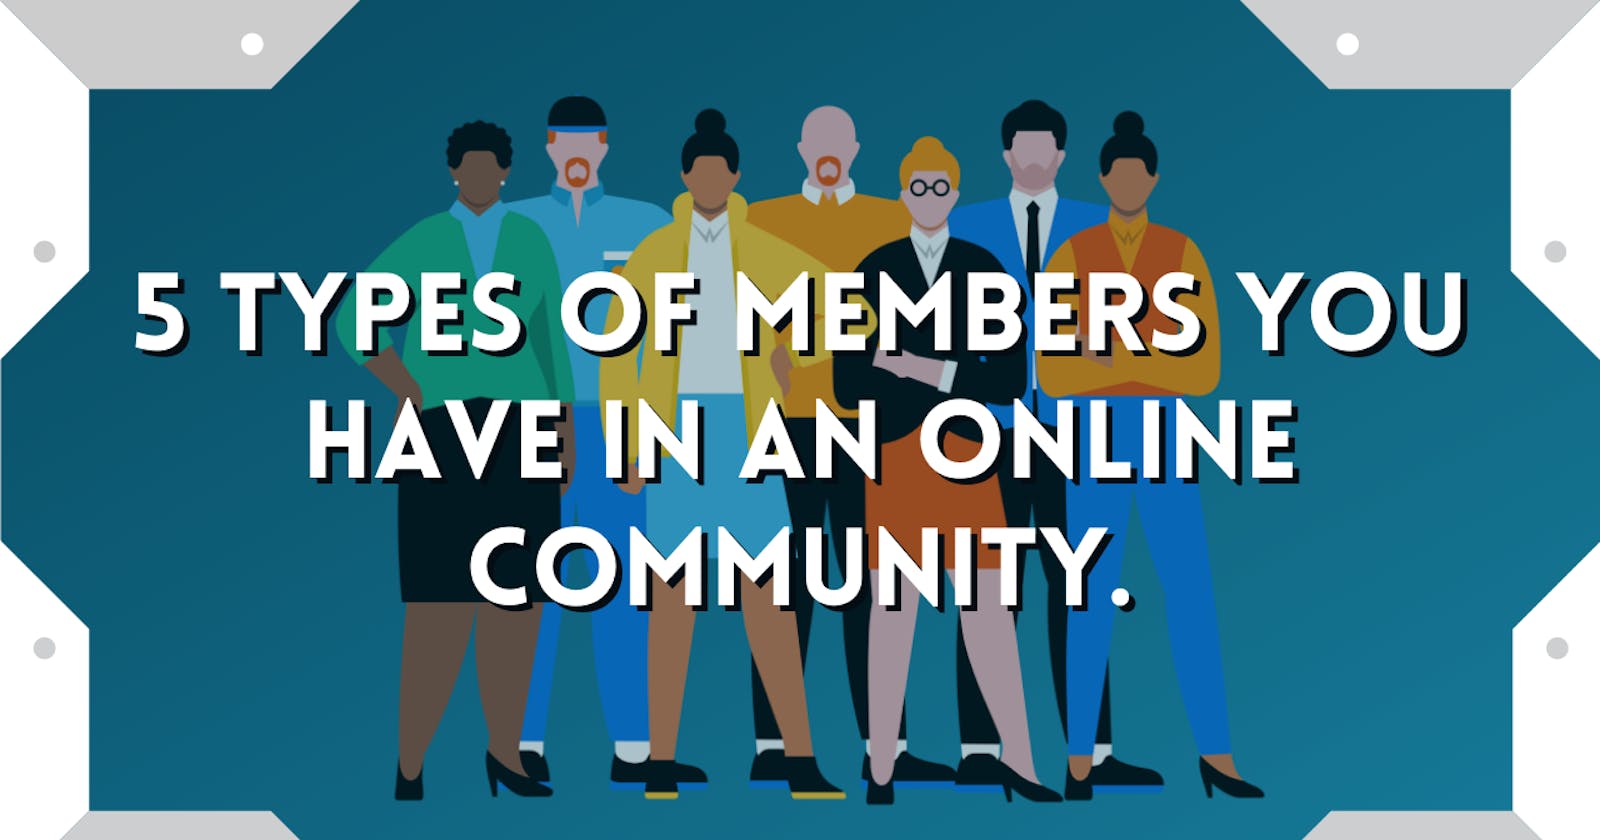 5 types of members you have in an Online Community.